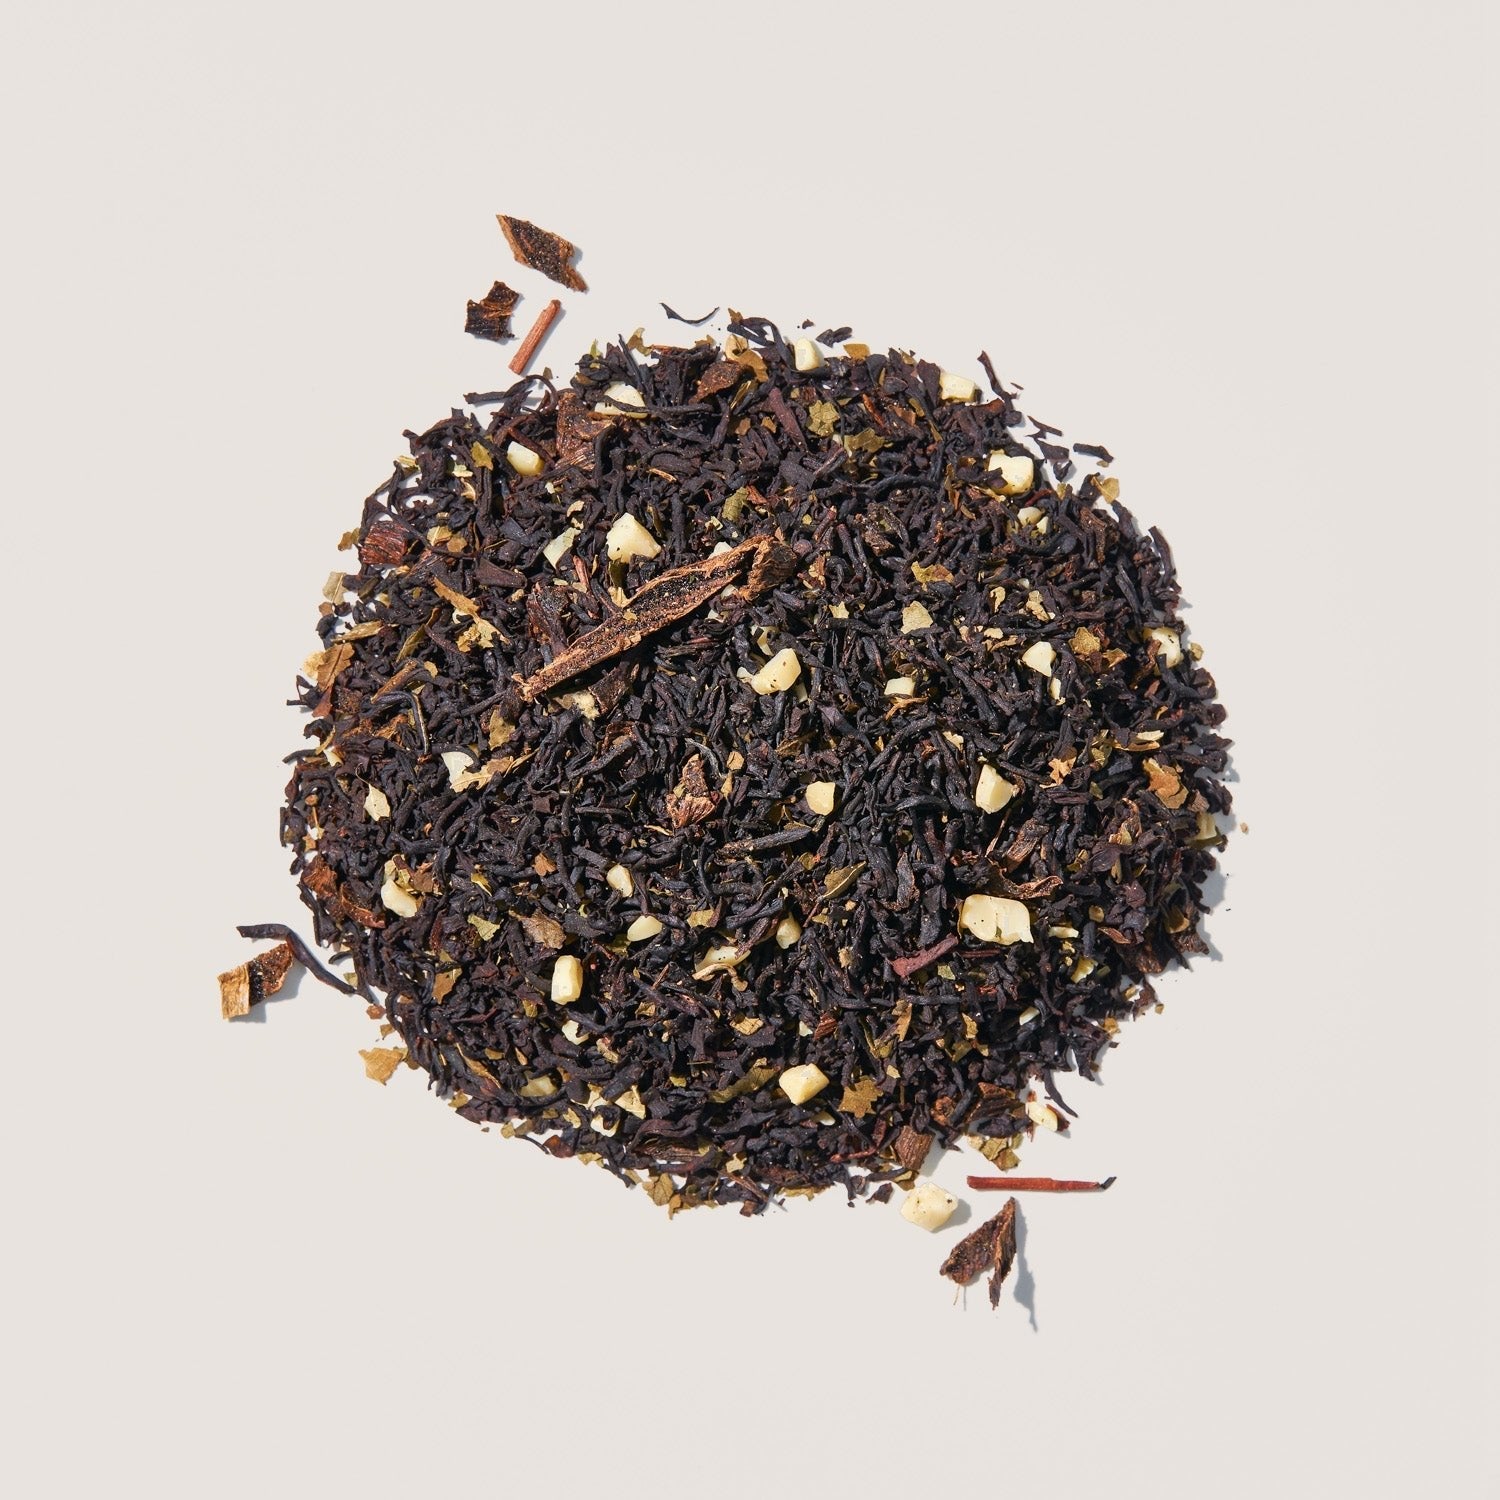 The Crowd Pleaser by Firebelly Tea